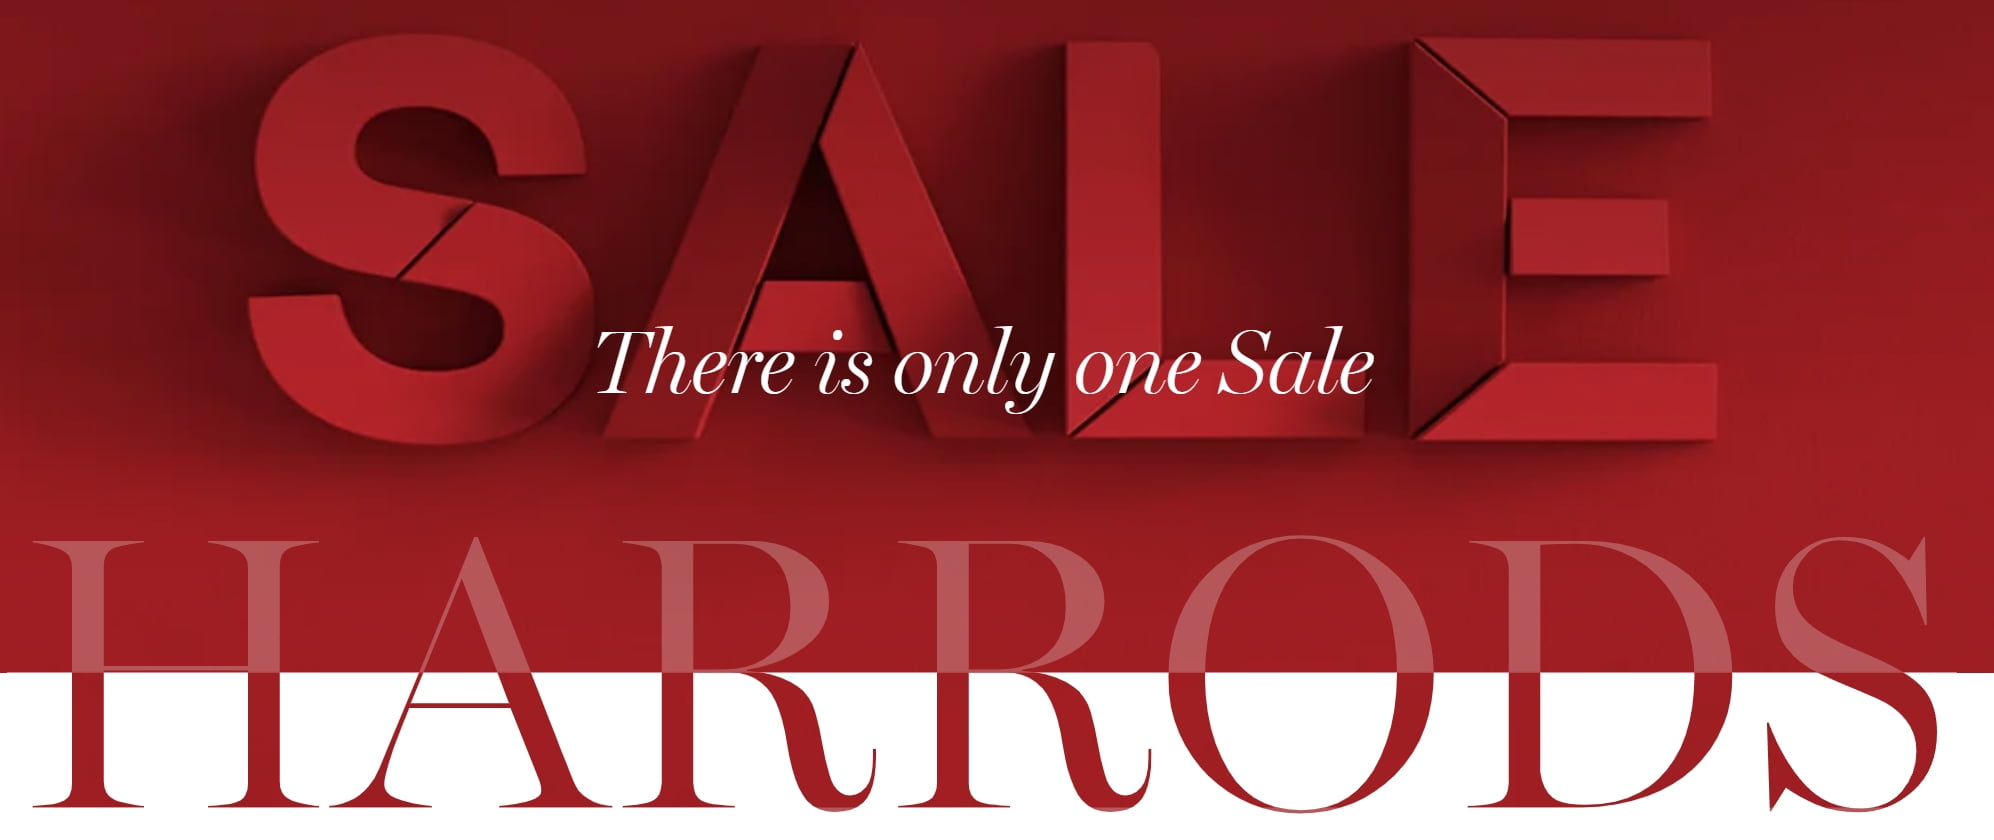 Up to 50% off Sale at Harrods